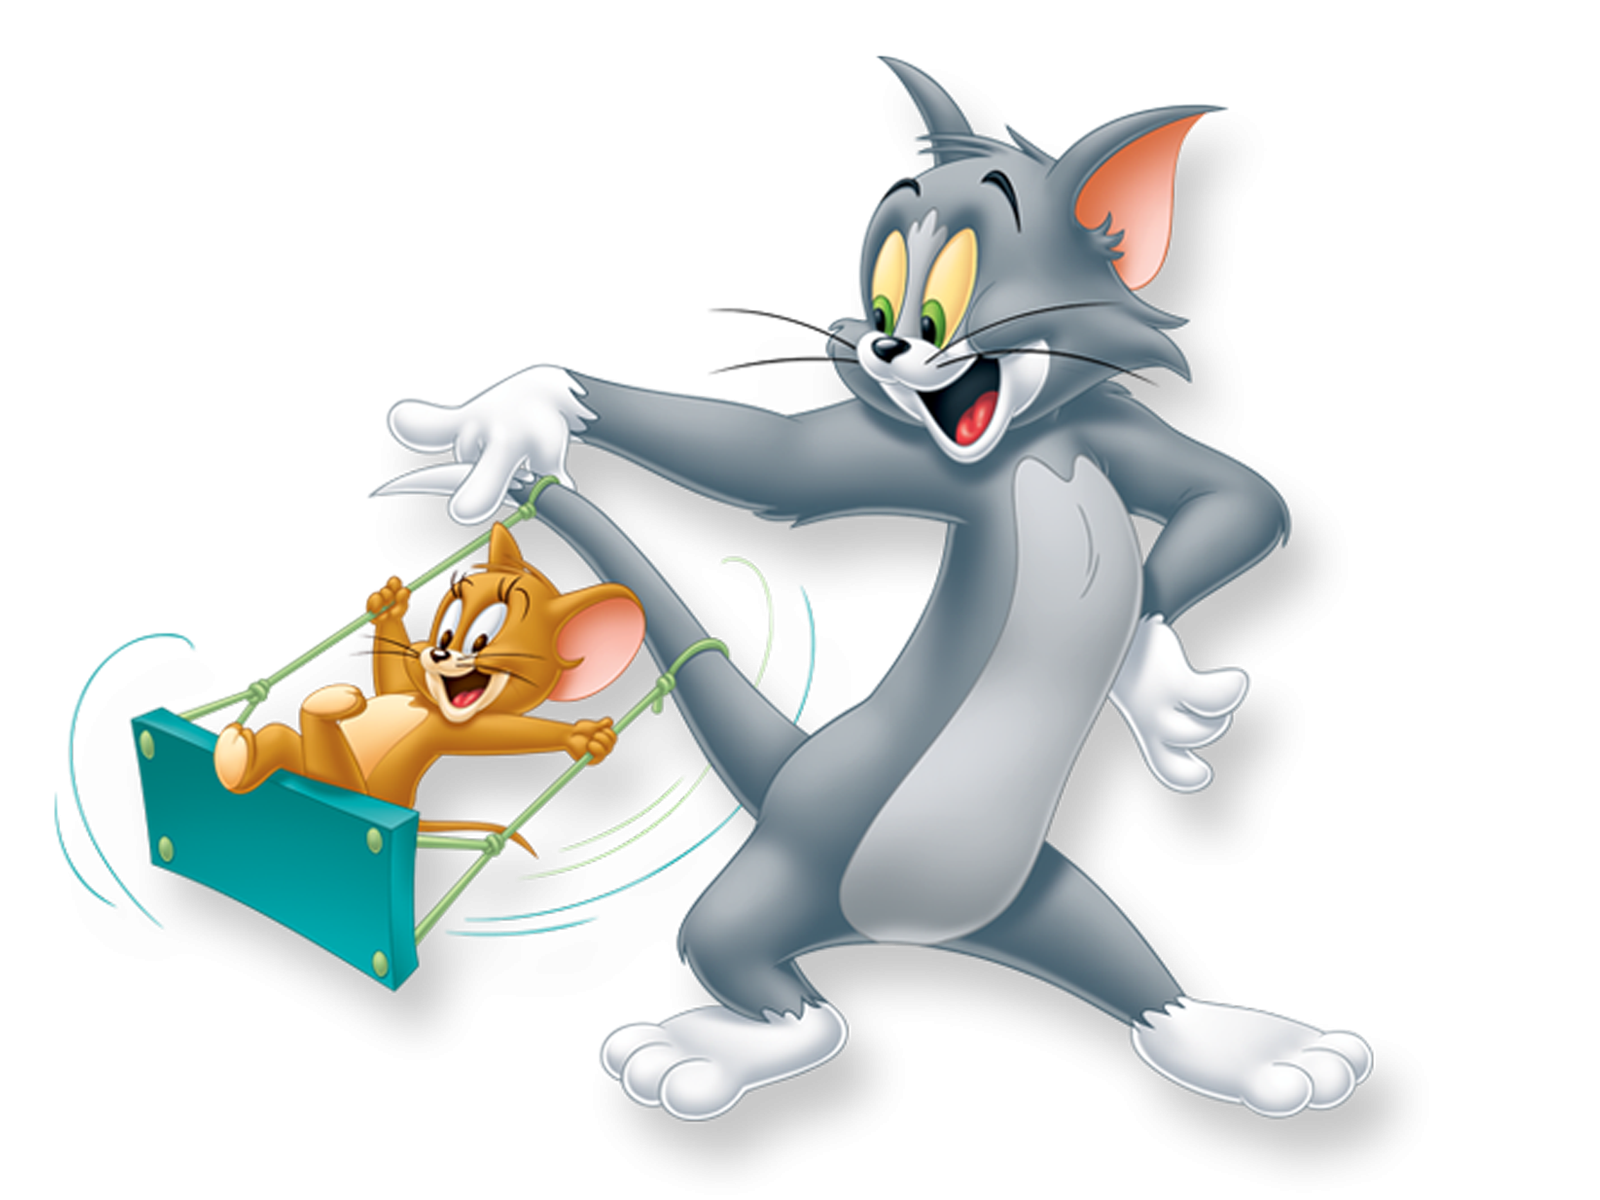 Tom And Jerry Cartoons Swing Desktop Wallpaper HD For Mobile Phones And Laptops 1920x1200, Wallpaper13.com